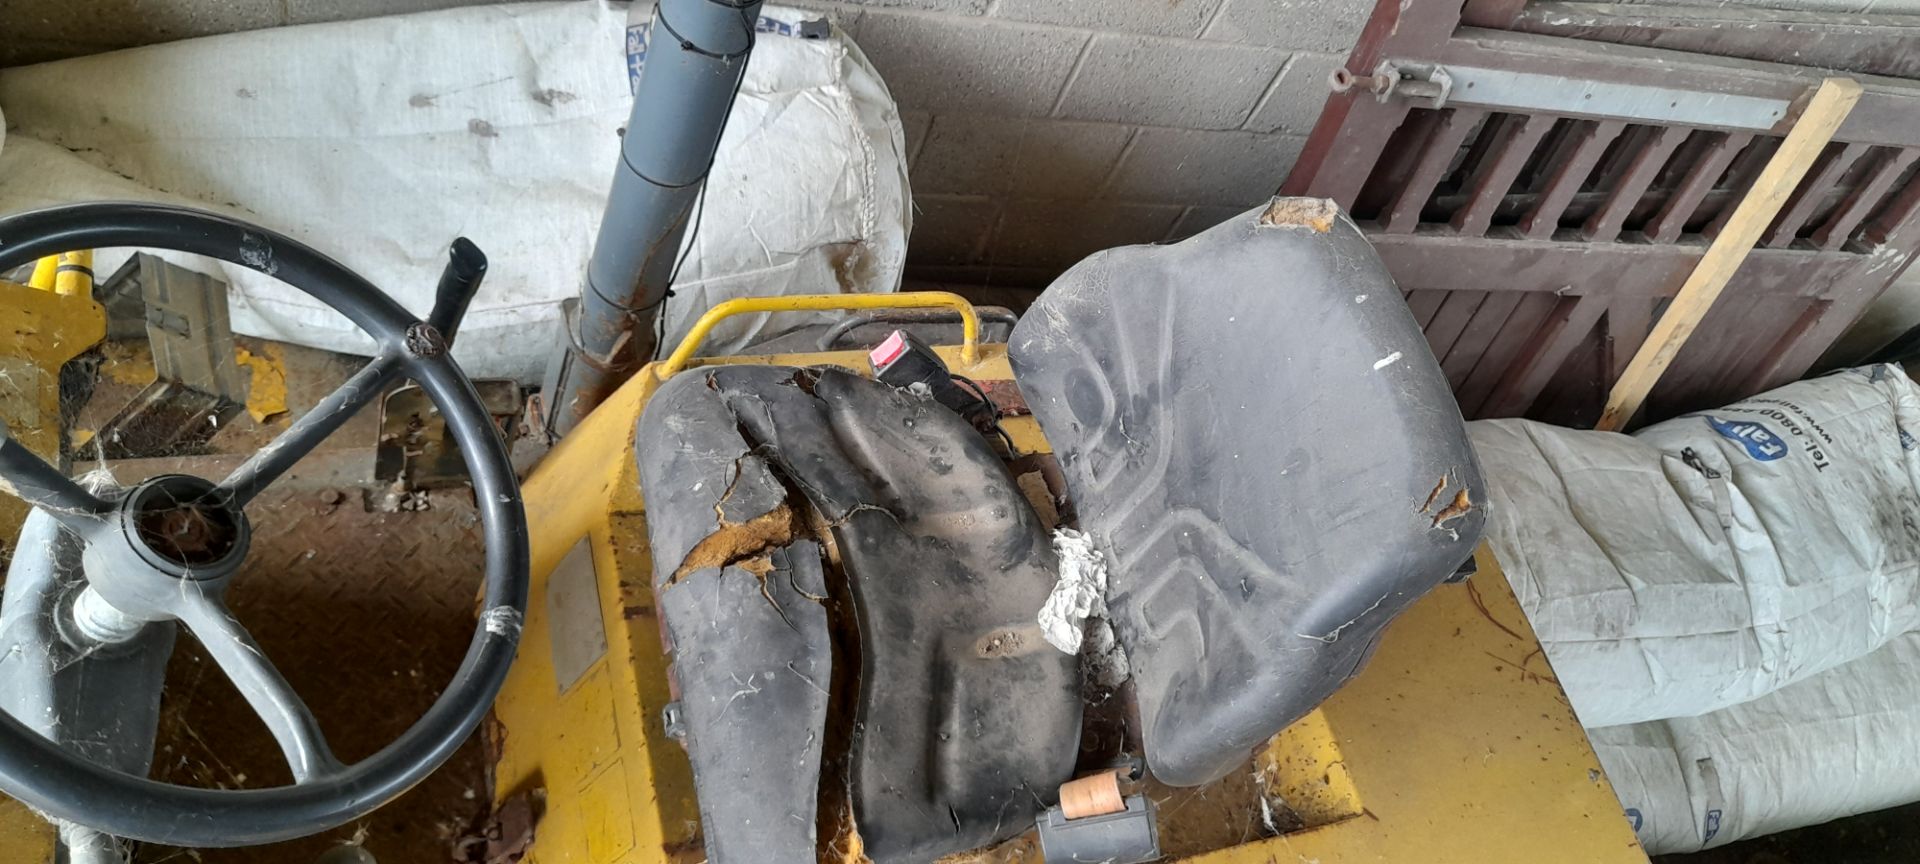 Newson 6 Tonne Dumper converted to mobile fuel dowser – Spares or Repair - Image 6 of 7